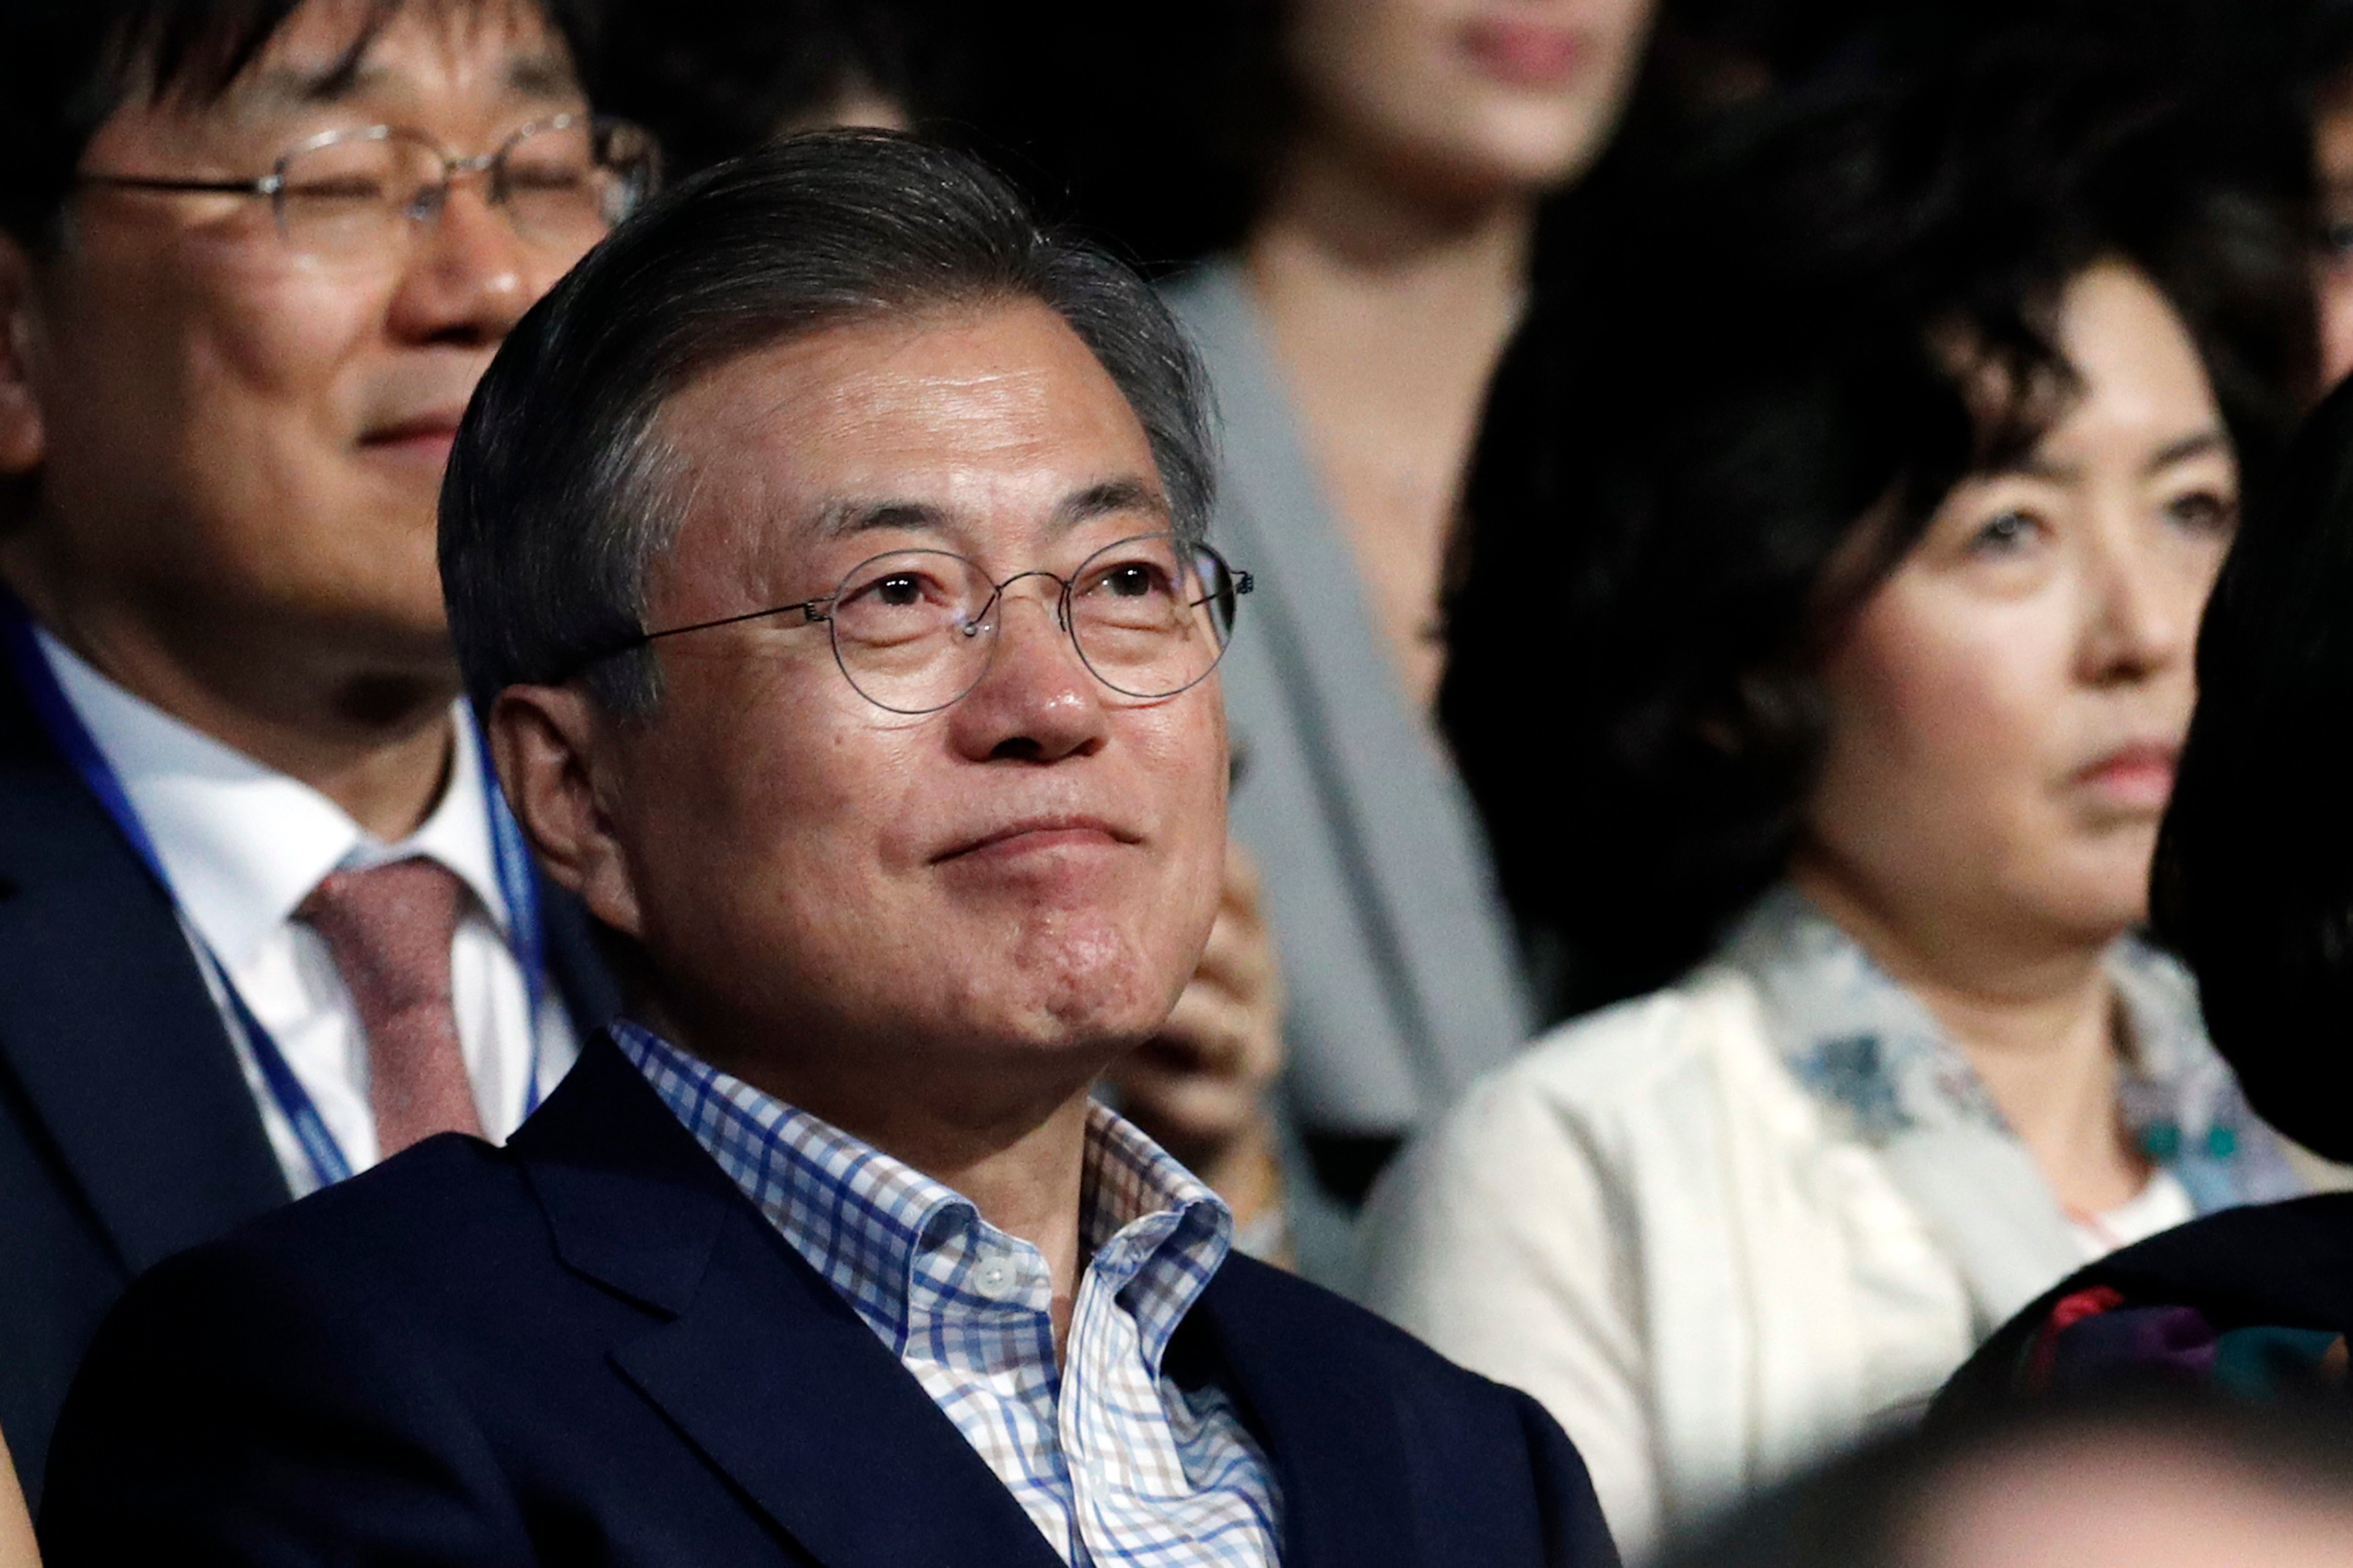 South Korean President Moon Jae-in and his wife Kim Jung-sook (not seen) attend a Korean cultural event in Paris, France, on Oct. 14, 2018. (Yoan Valat—EPA-EFE/REX/Shutterstock)